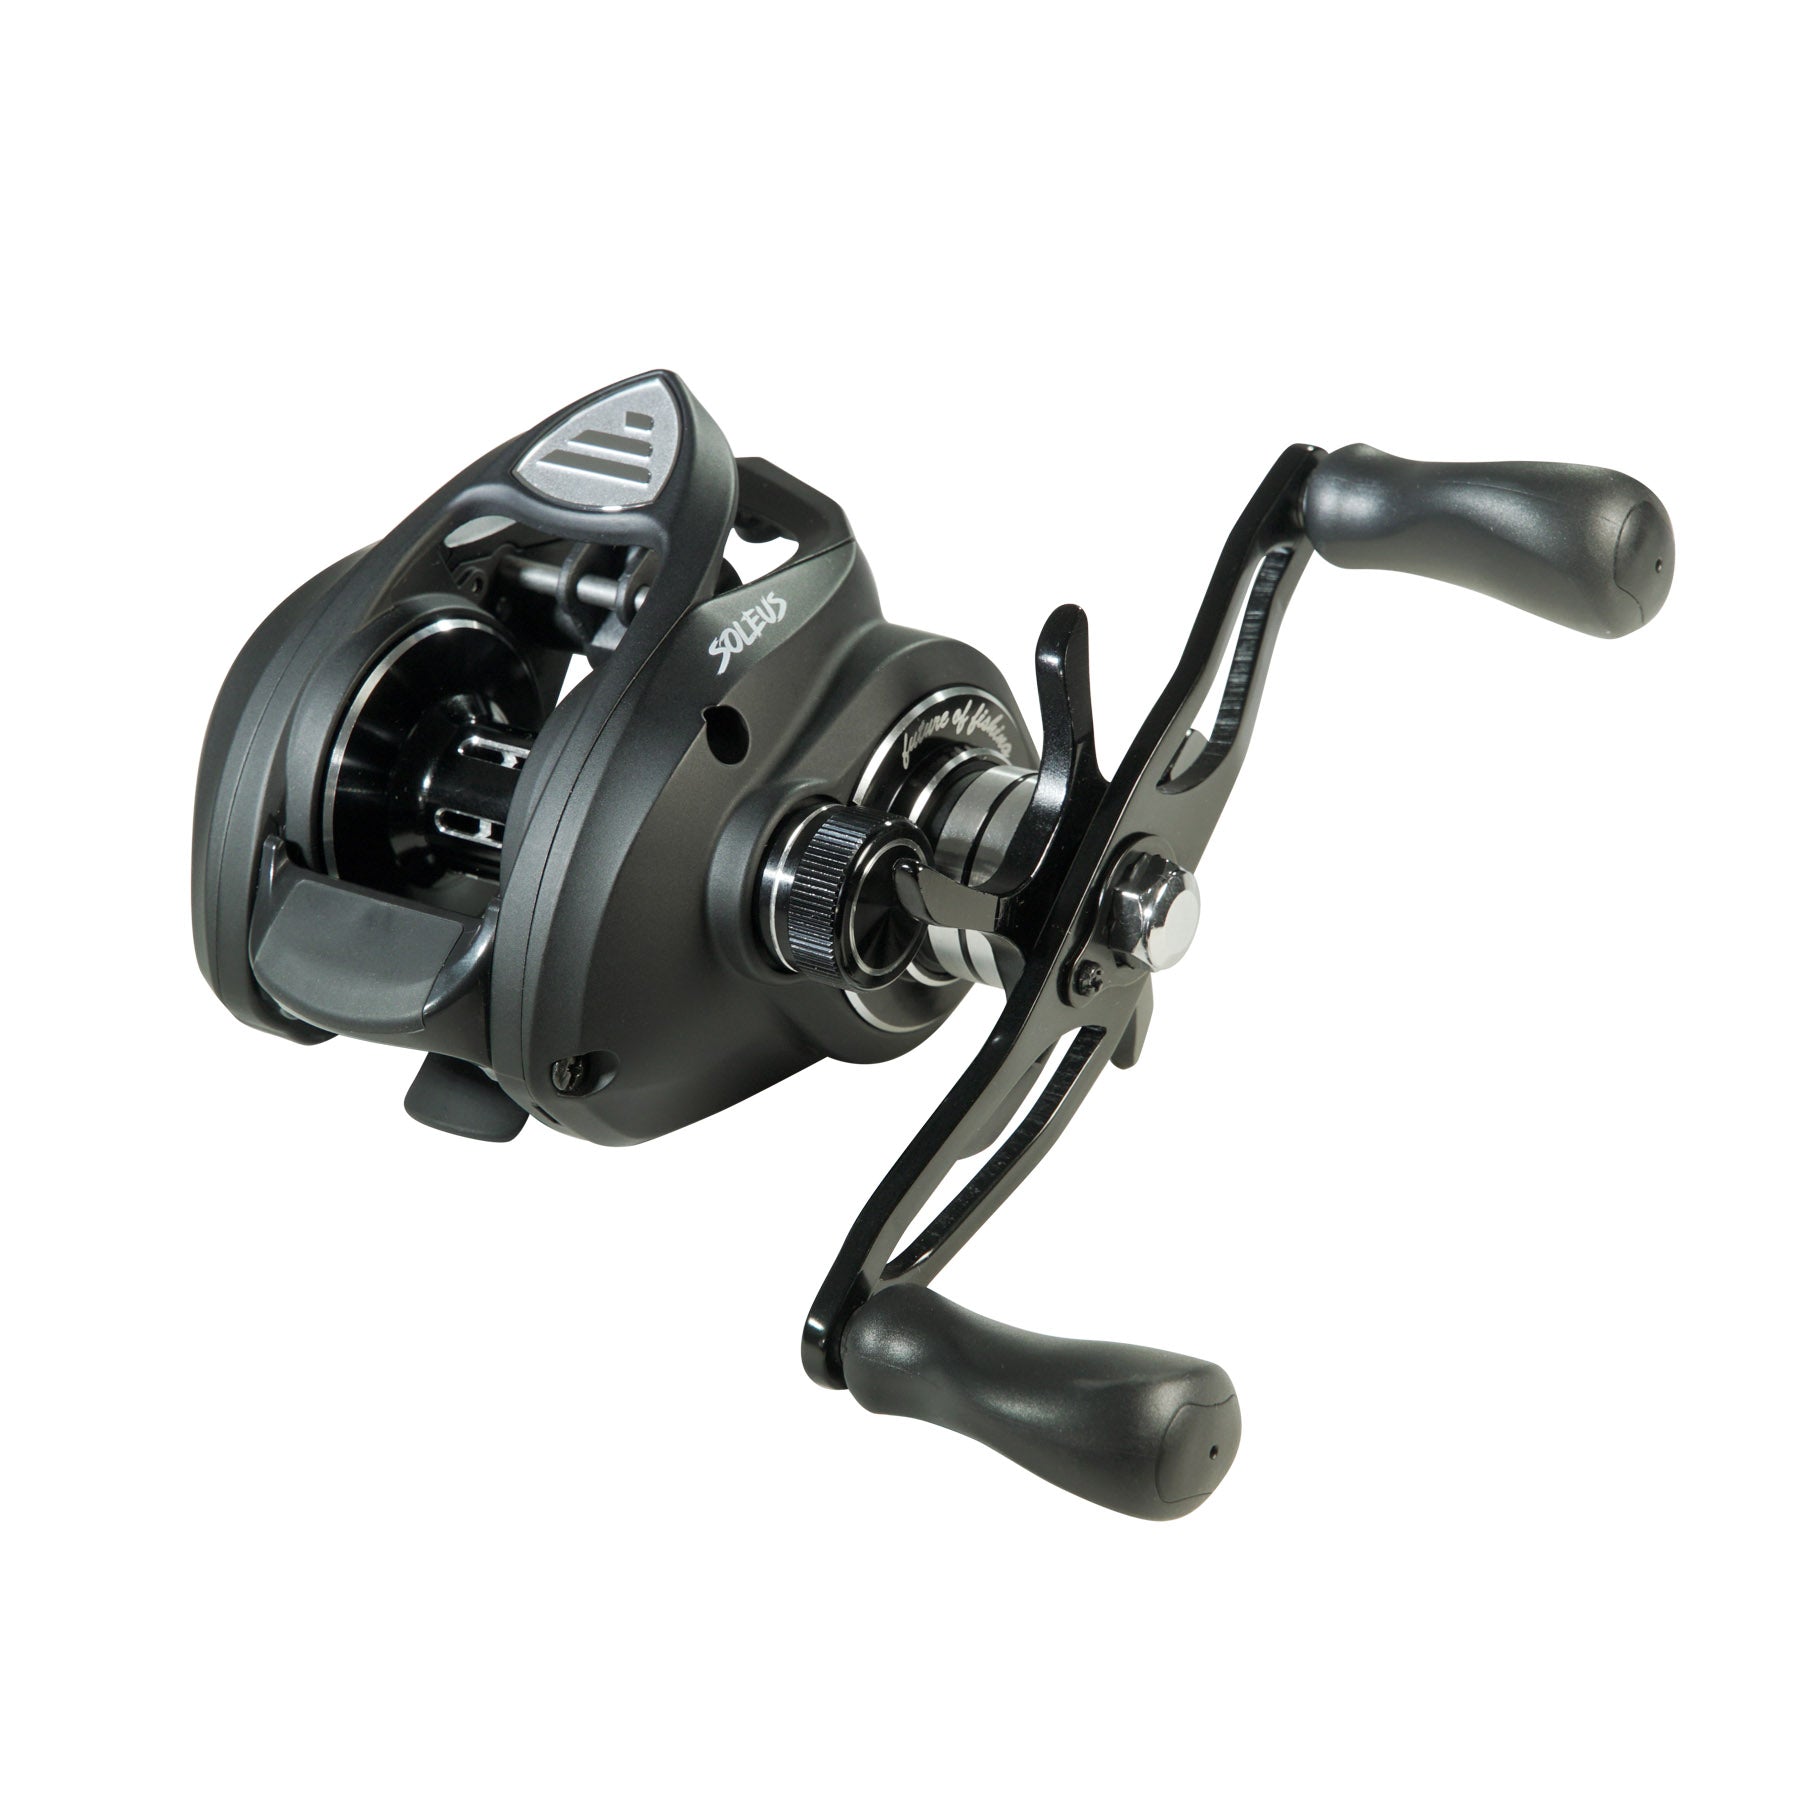 Favorite Fishing Soleus Casting Reel with Free S&H — CampSaver